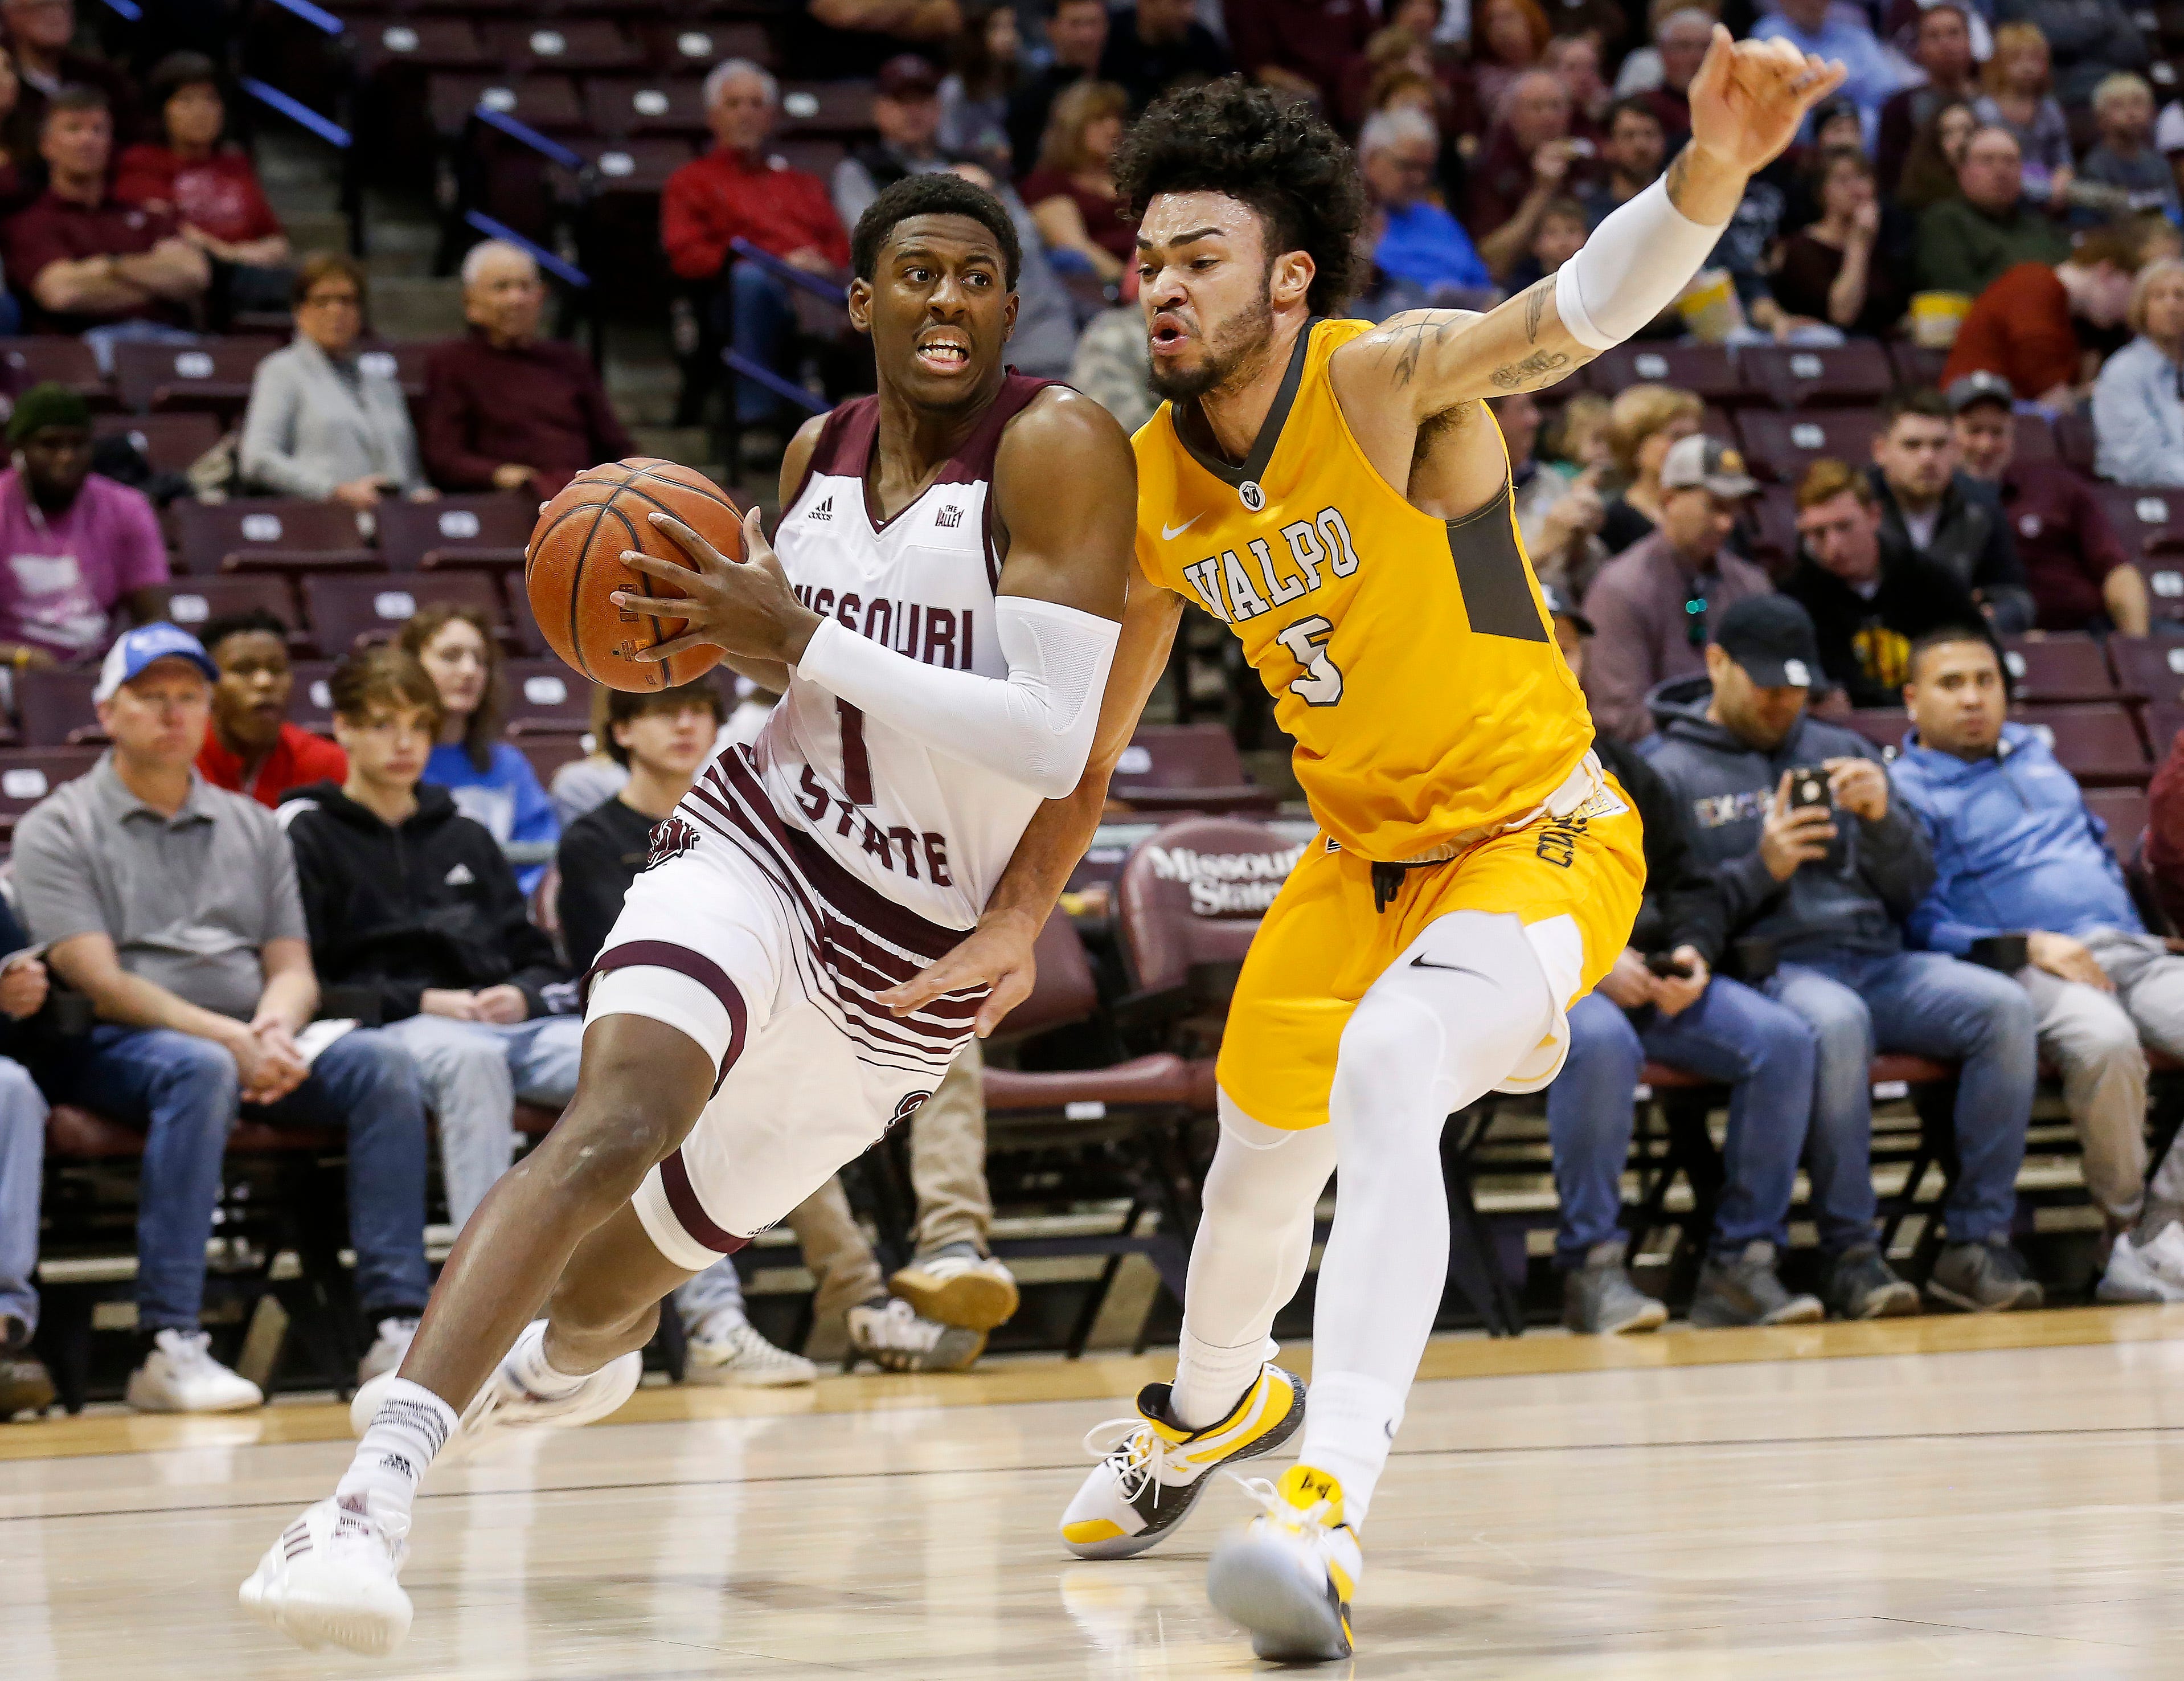 Keandre Cook, of Missouri State University, drives across the base line during the Bears game against Valparaiso at JQH Arena on Saturday, Jan. 5, 2018.